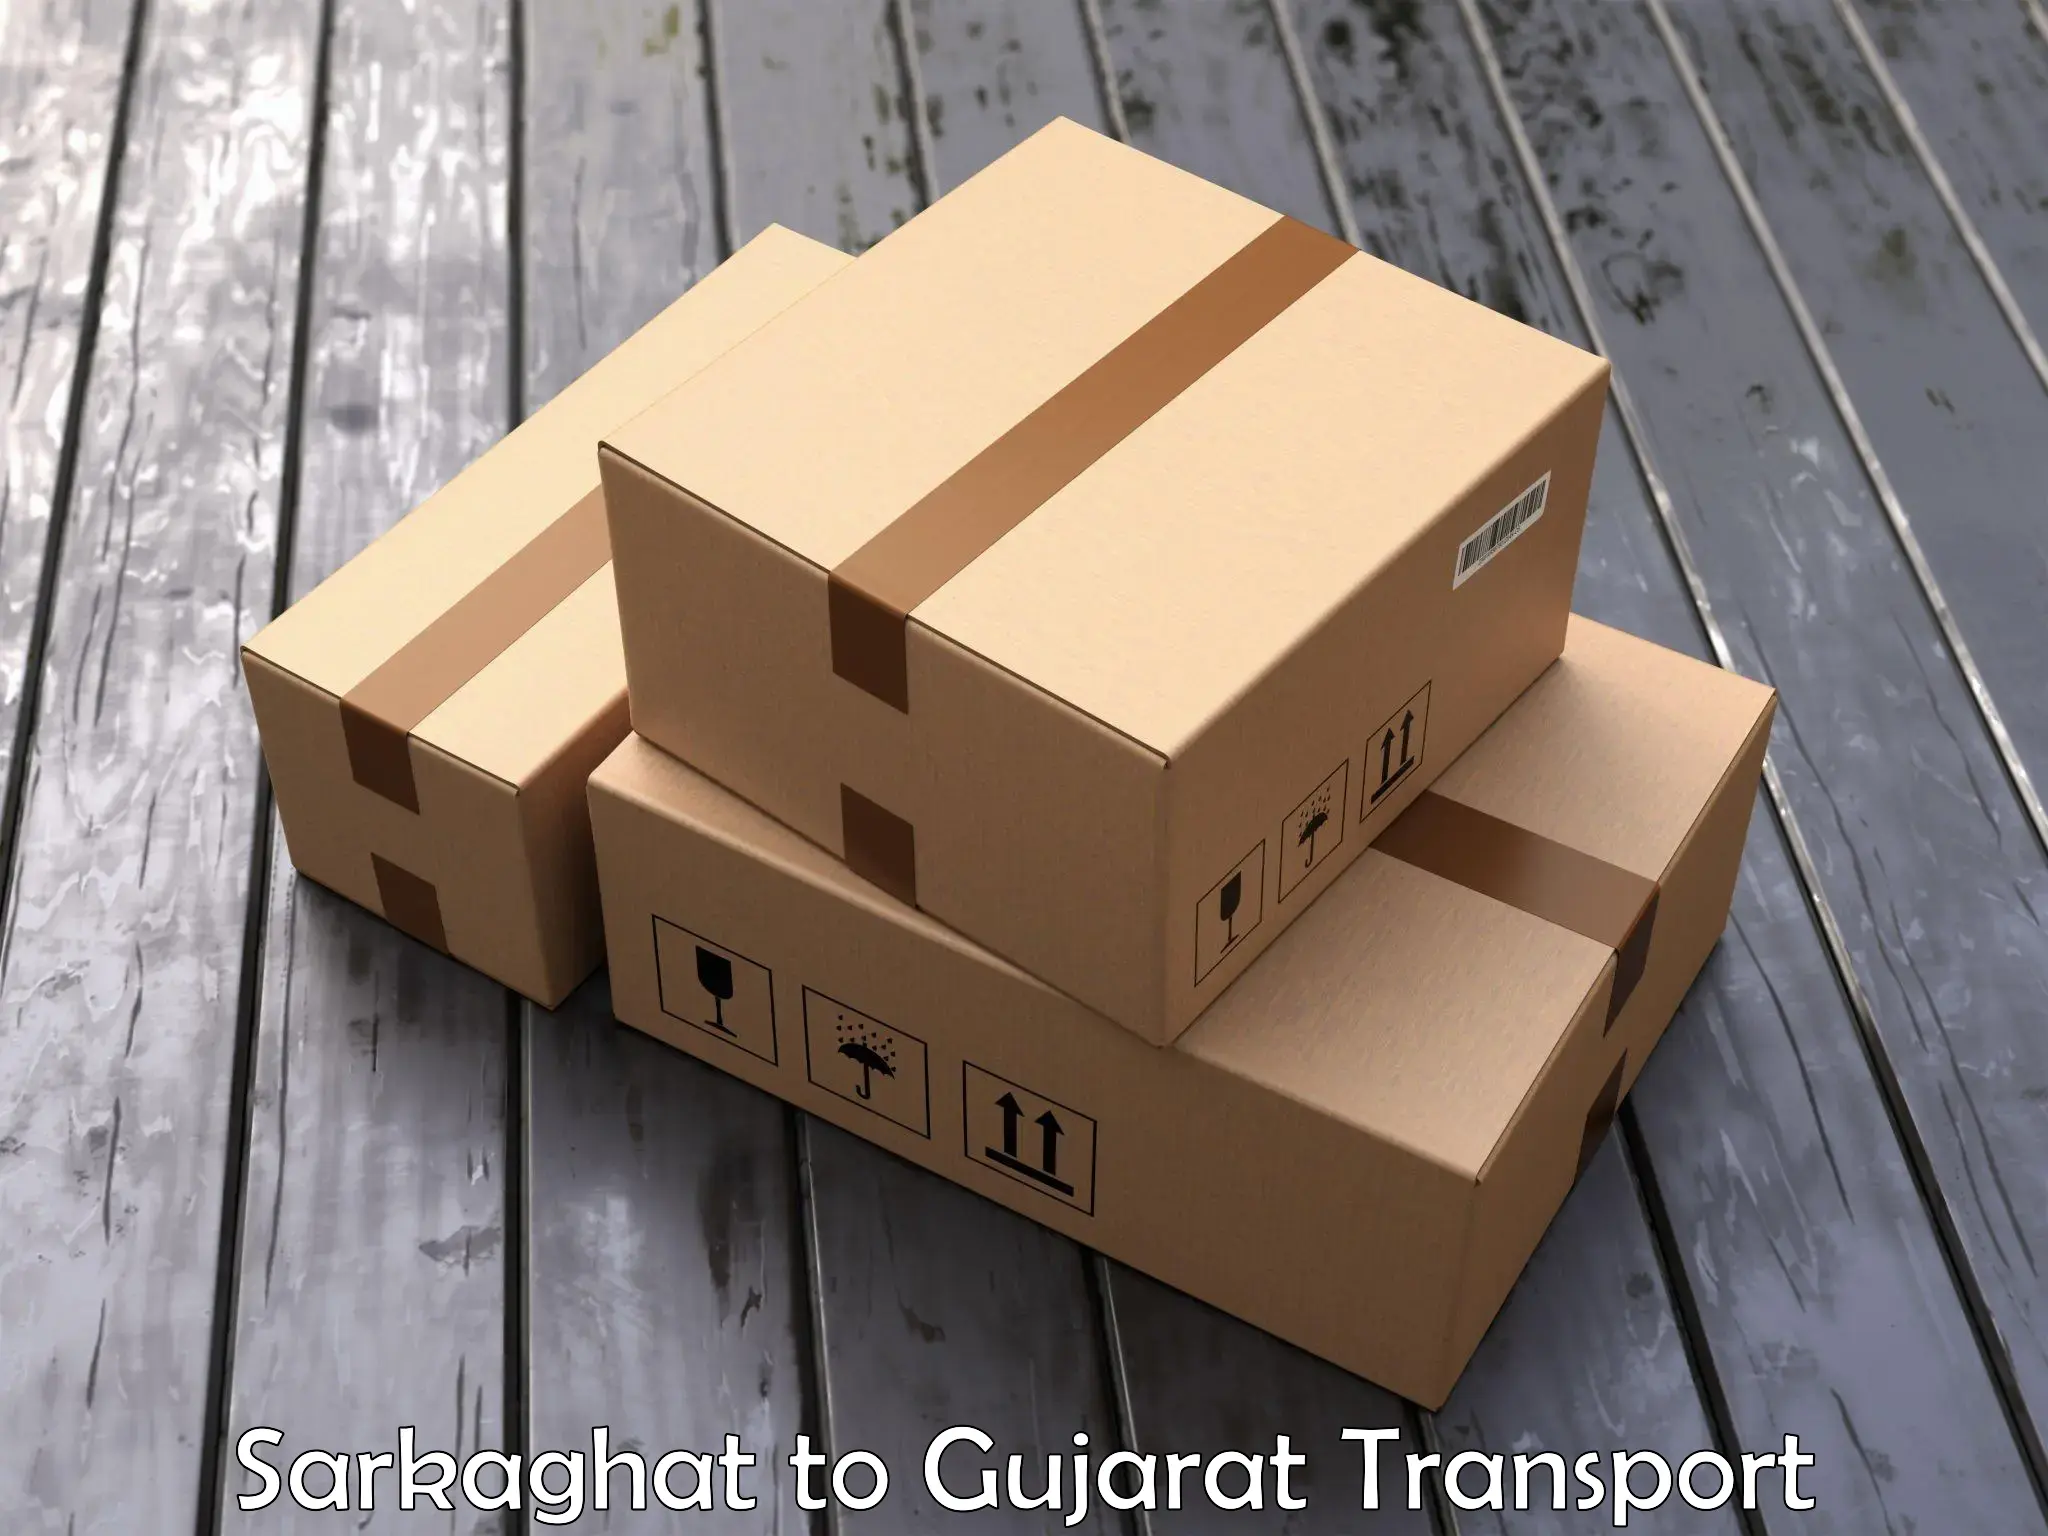 Best transport services in India Sarkaghat to Madhavpur